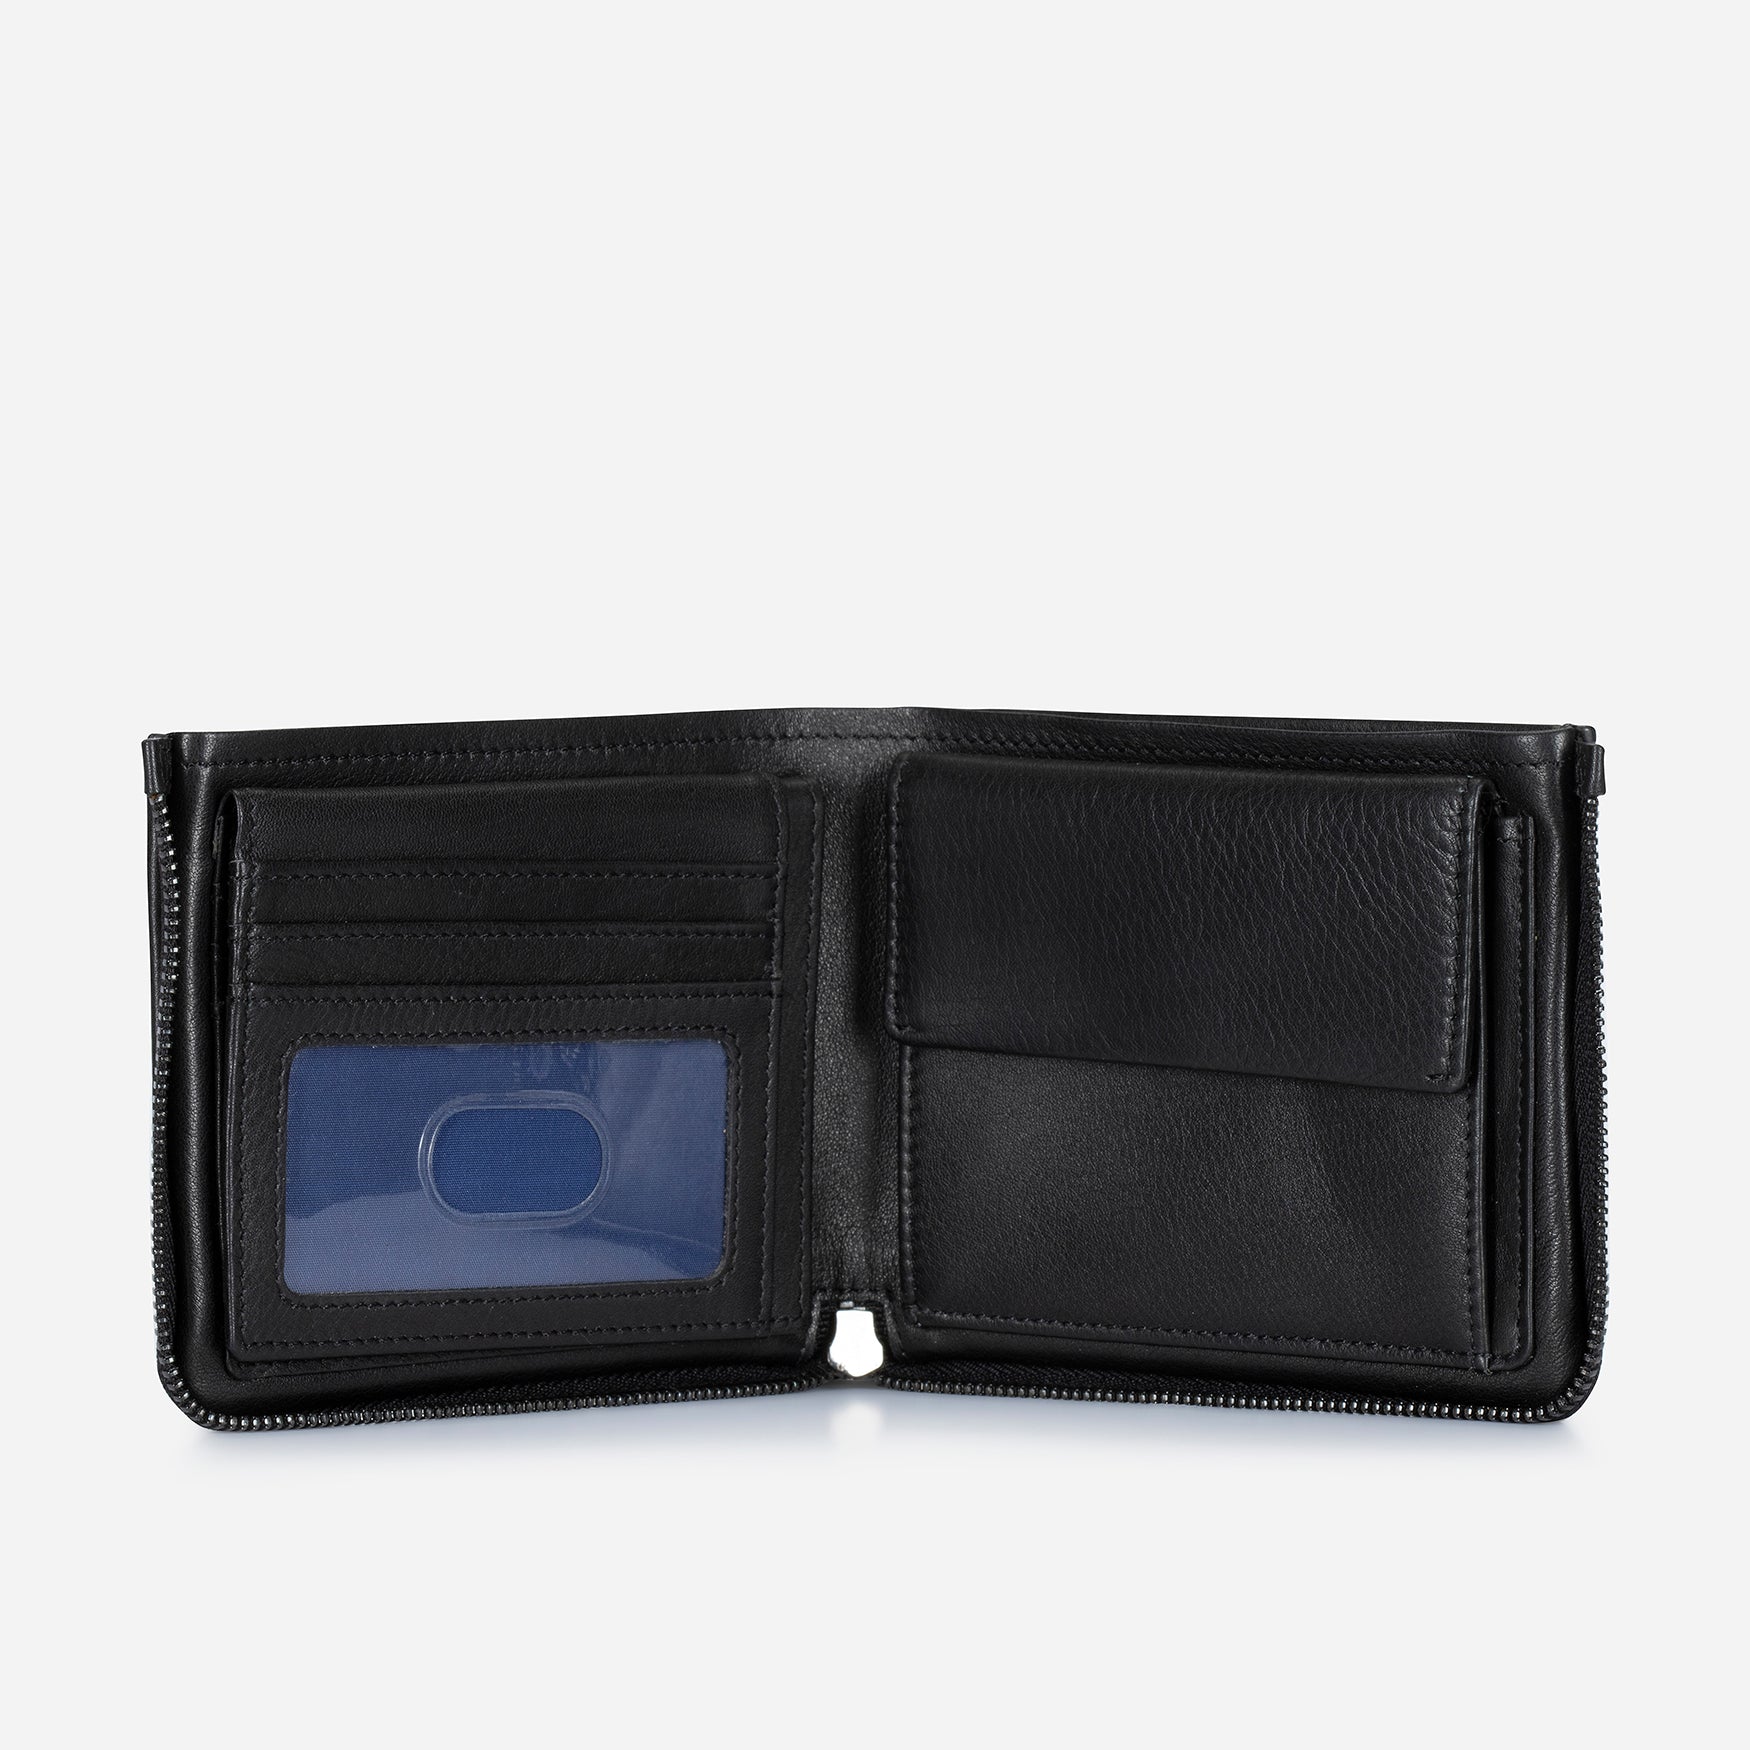 Armstrong Leather Zip Around Wallet, Black